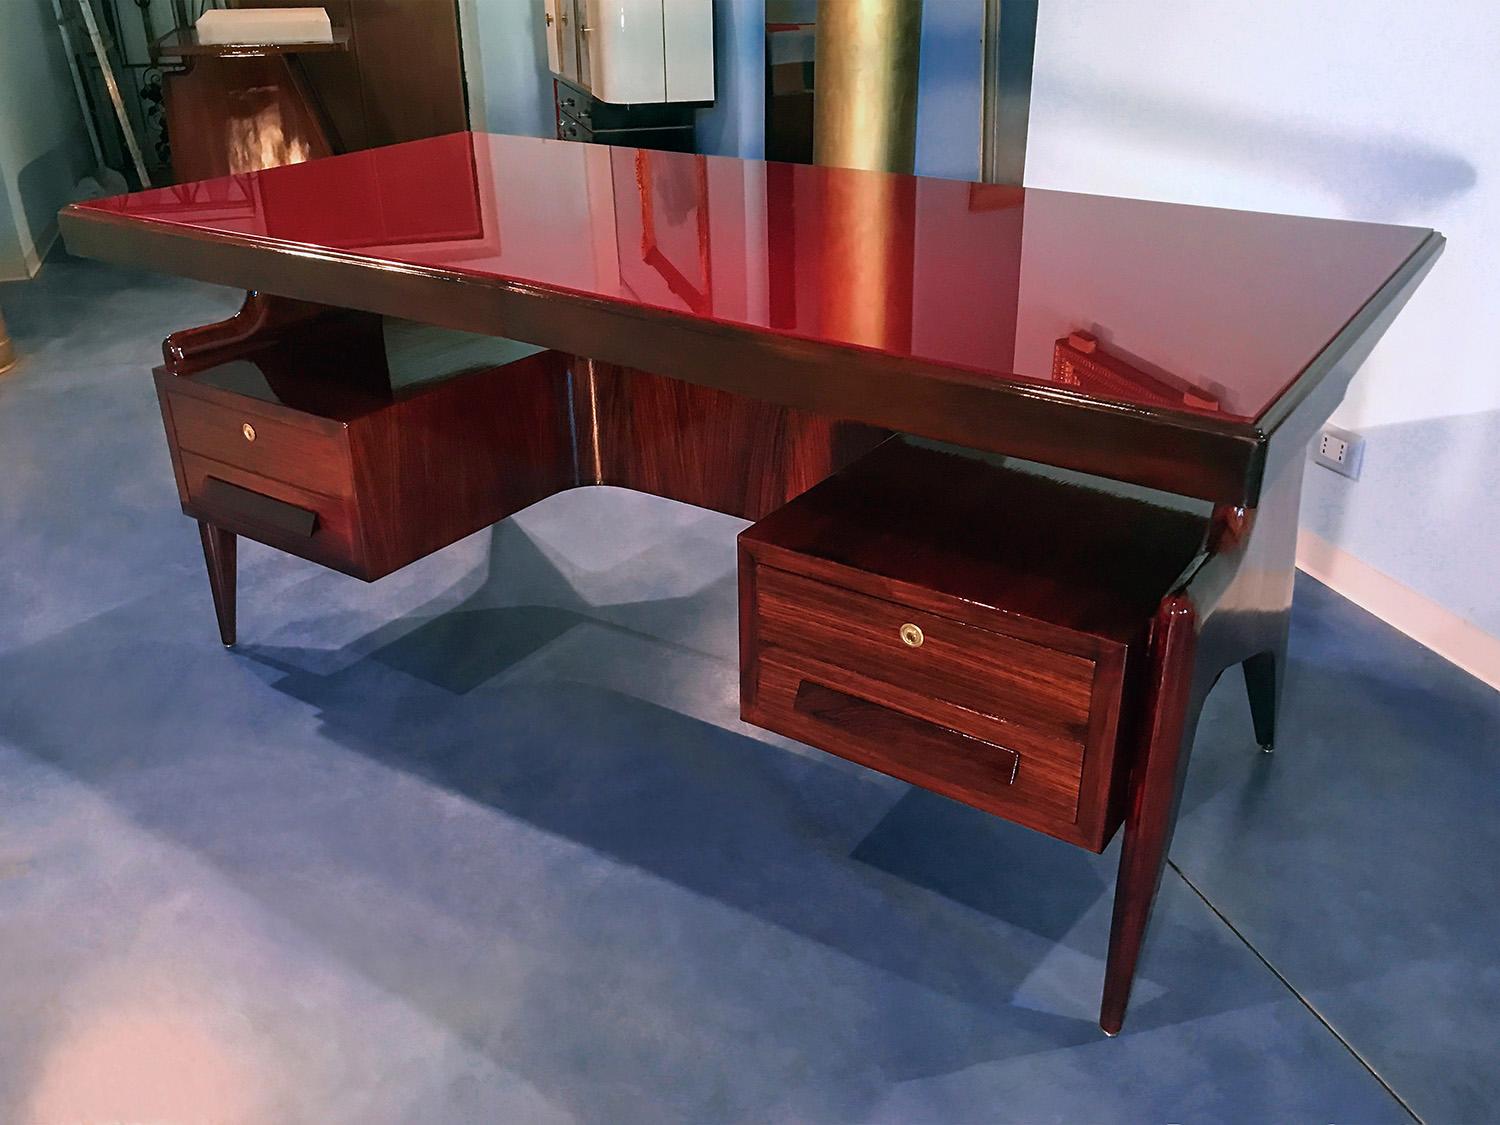 Very rare executive desk designed by Vittorio Dassi in the 1950s.
Its structure is characterized by a unique and unusual sculptural shape, supported by tapered legs finished with brass feet.
It’s equipped with four drawers, two lockable, and top